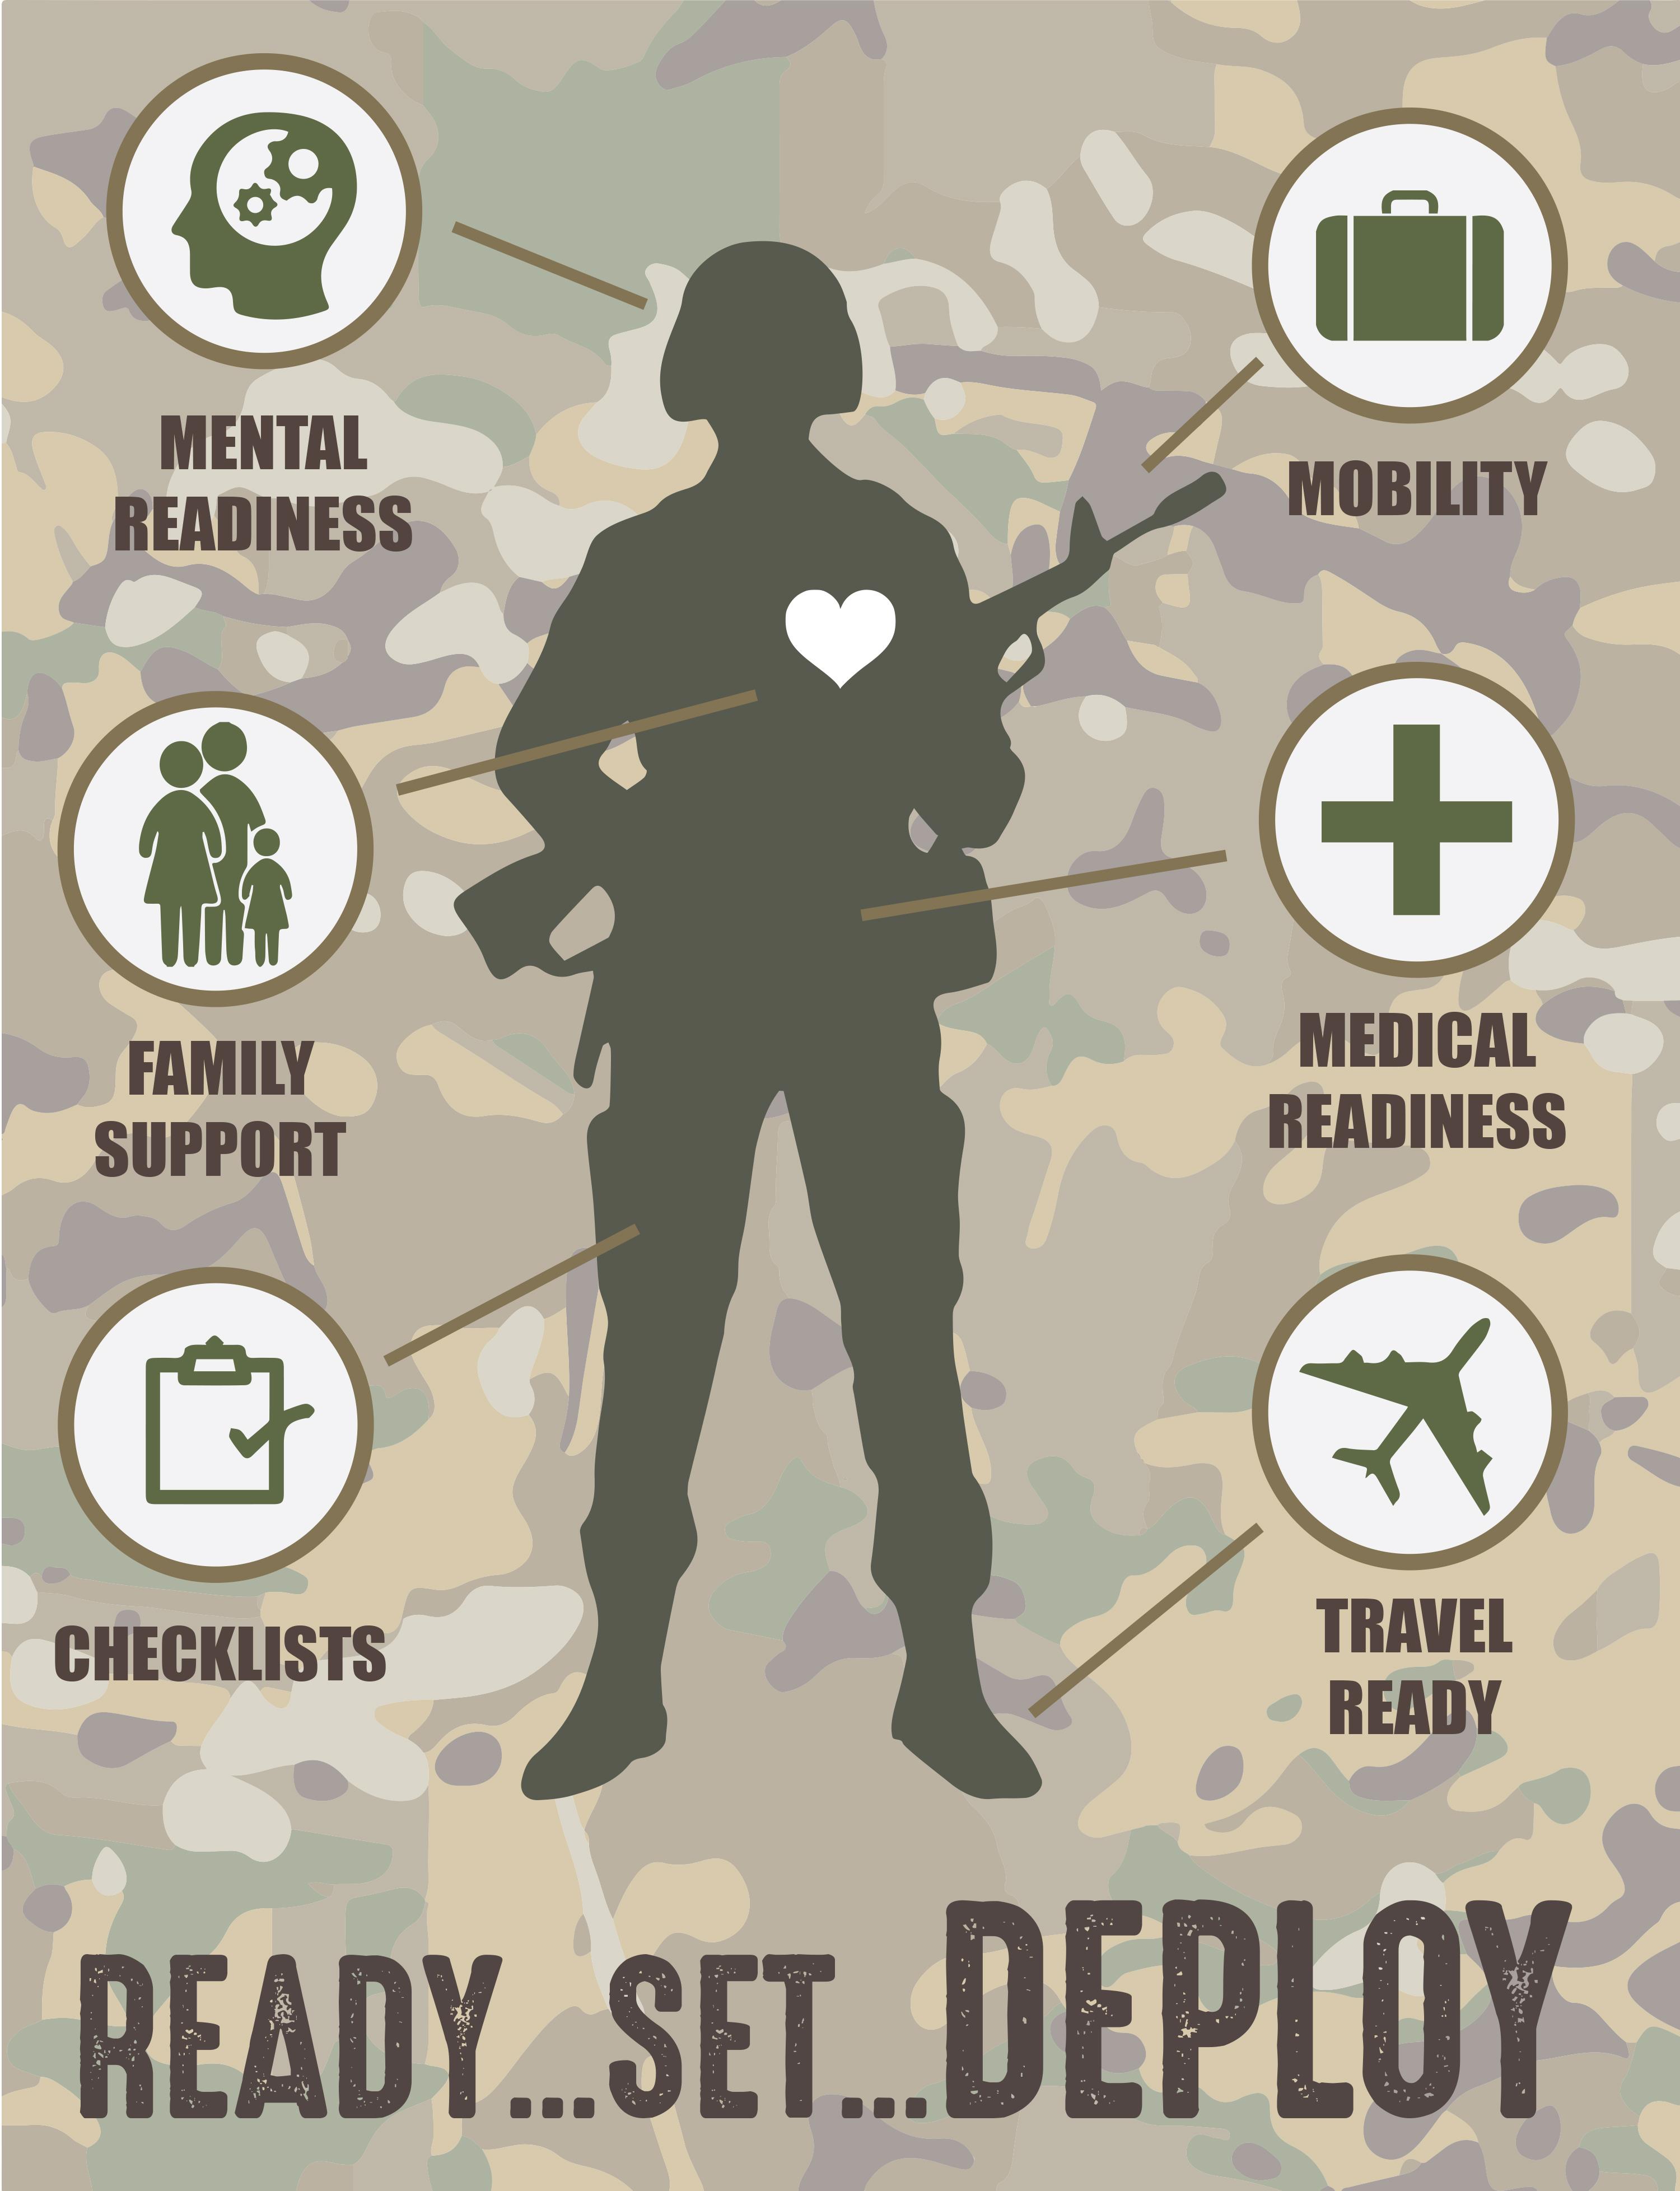 9 Things That Will Make Your Life Easier During a Deployment